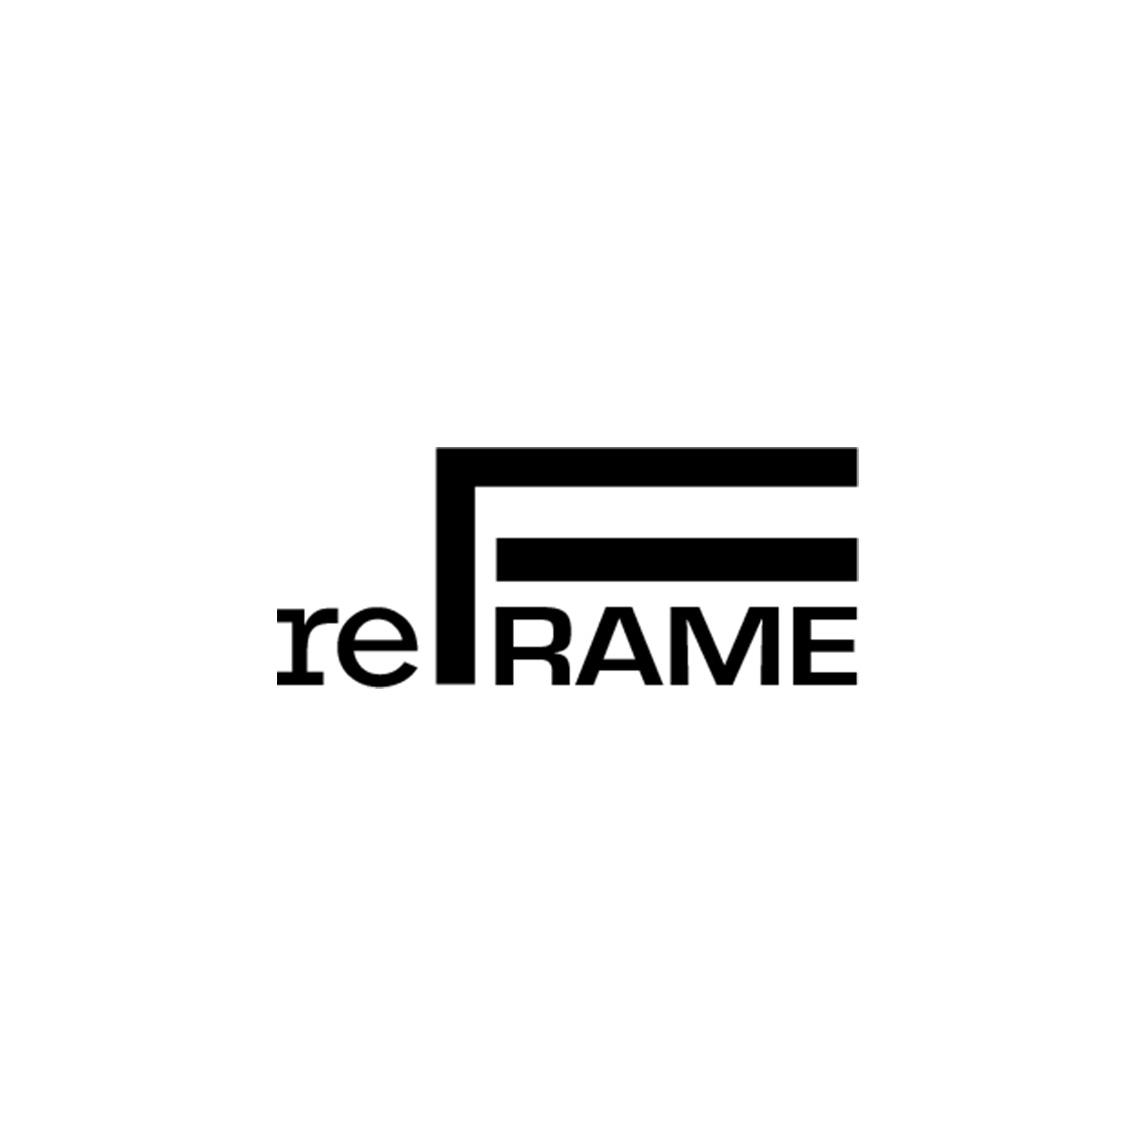 reFRAME, 2023 MMAPROJECTS S.R.L.